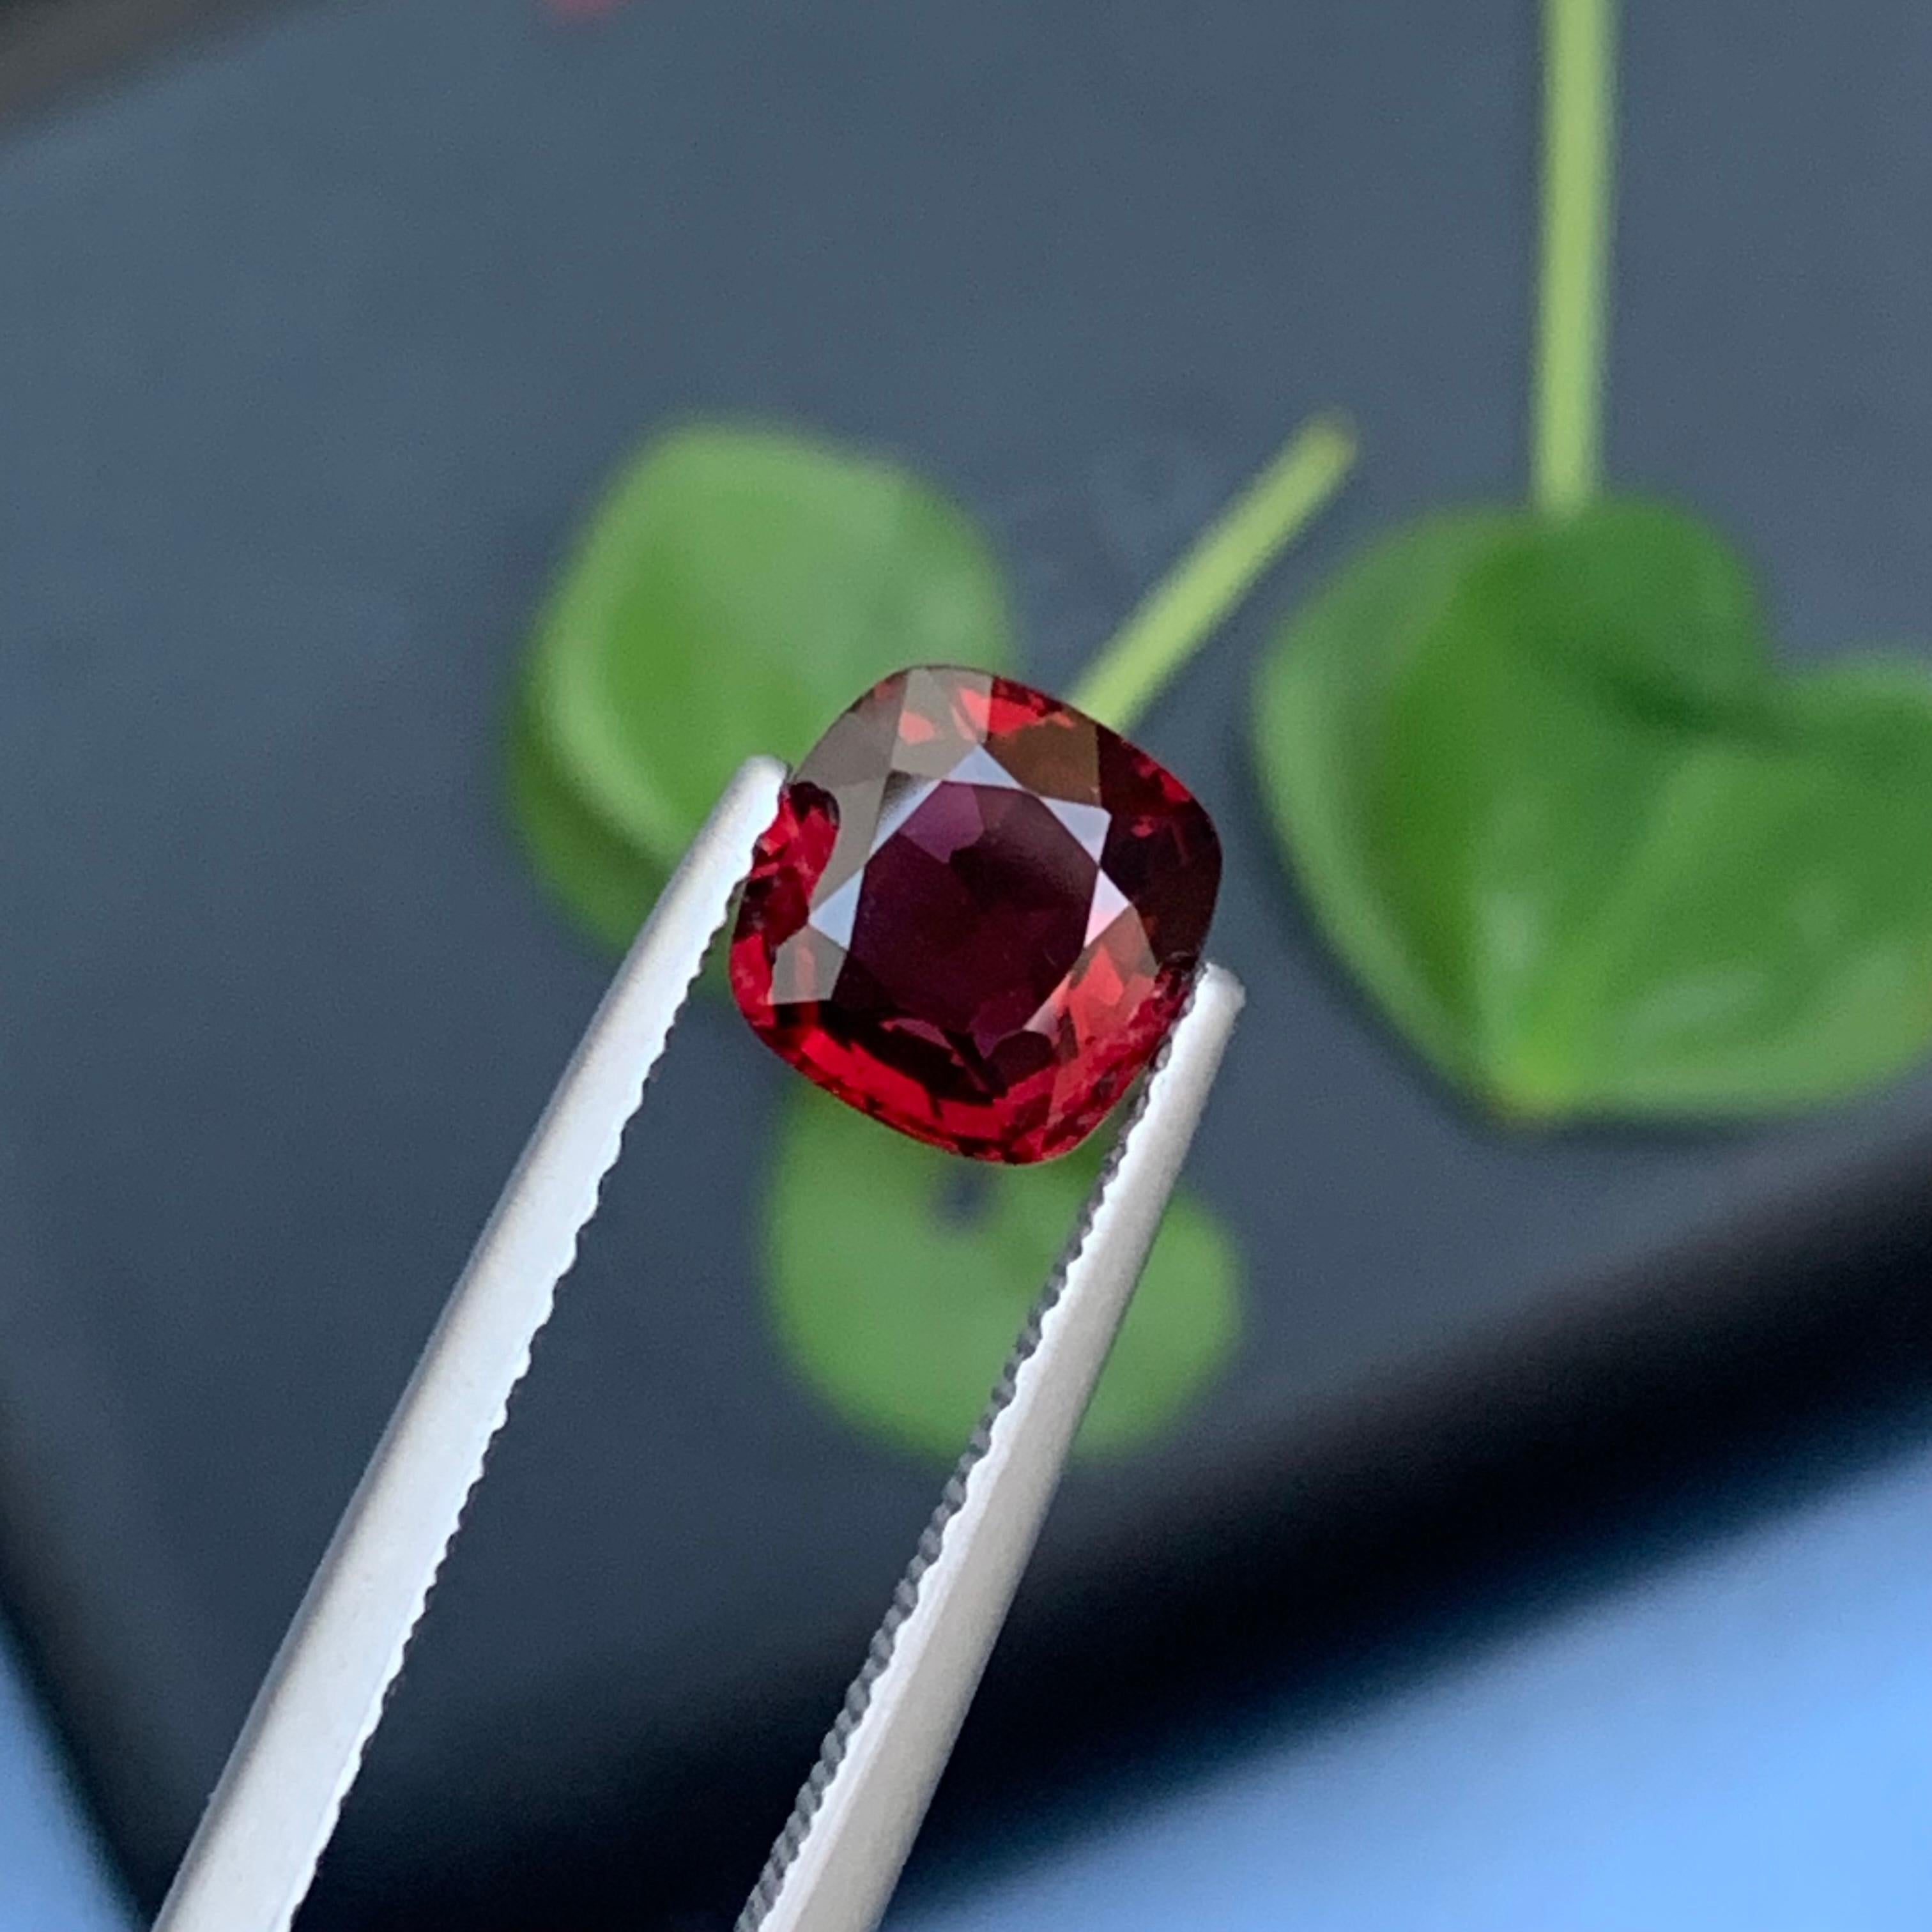 Stunning 1.60 Carat Natural Loose Red Spinel from Myanmar Burma Cushion Shape For Sale 2